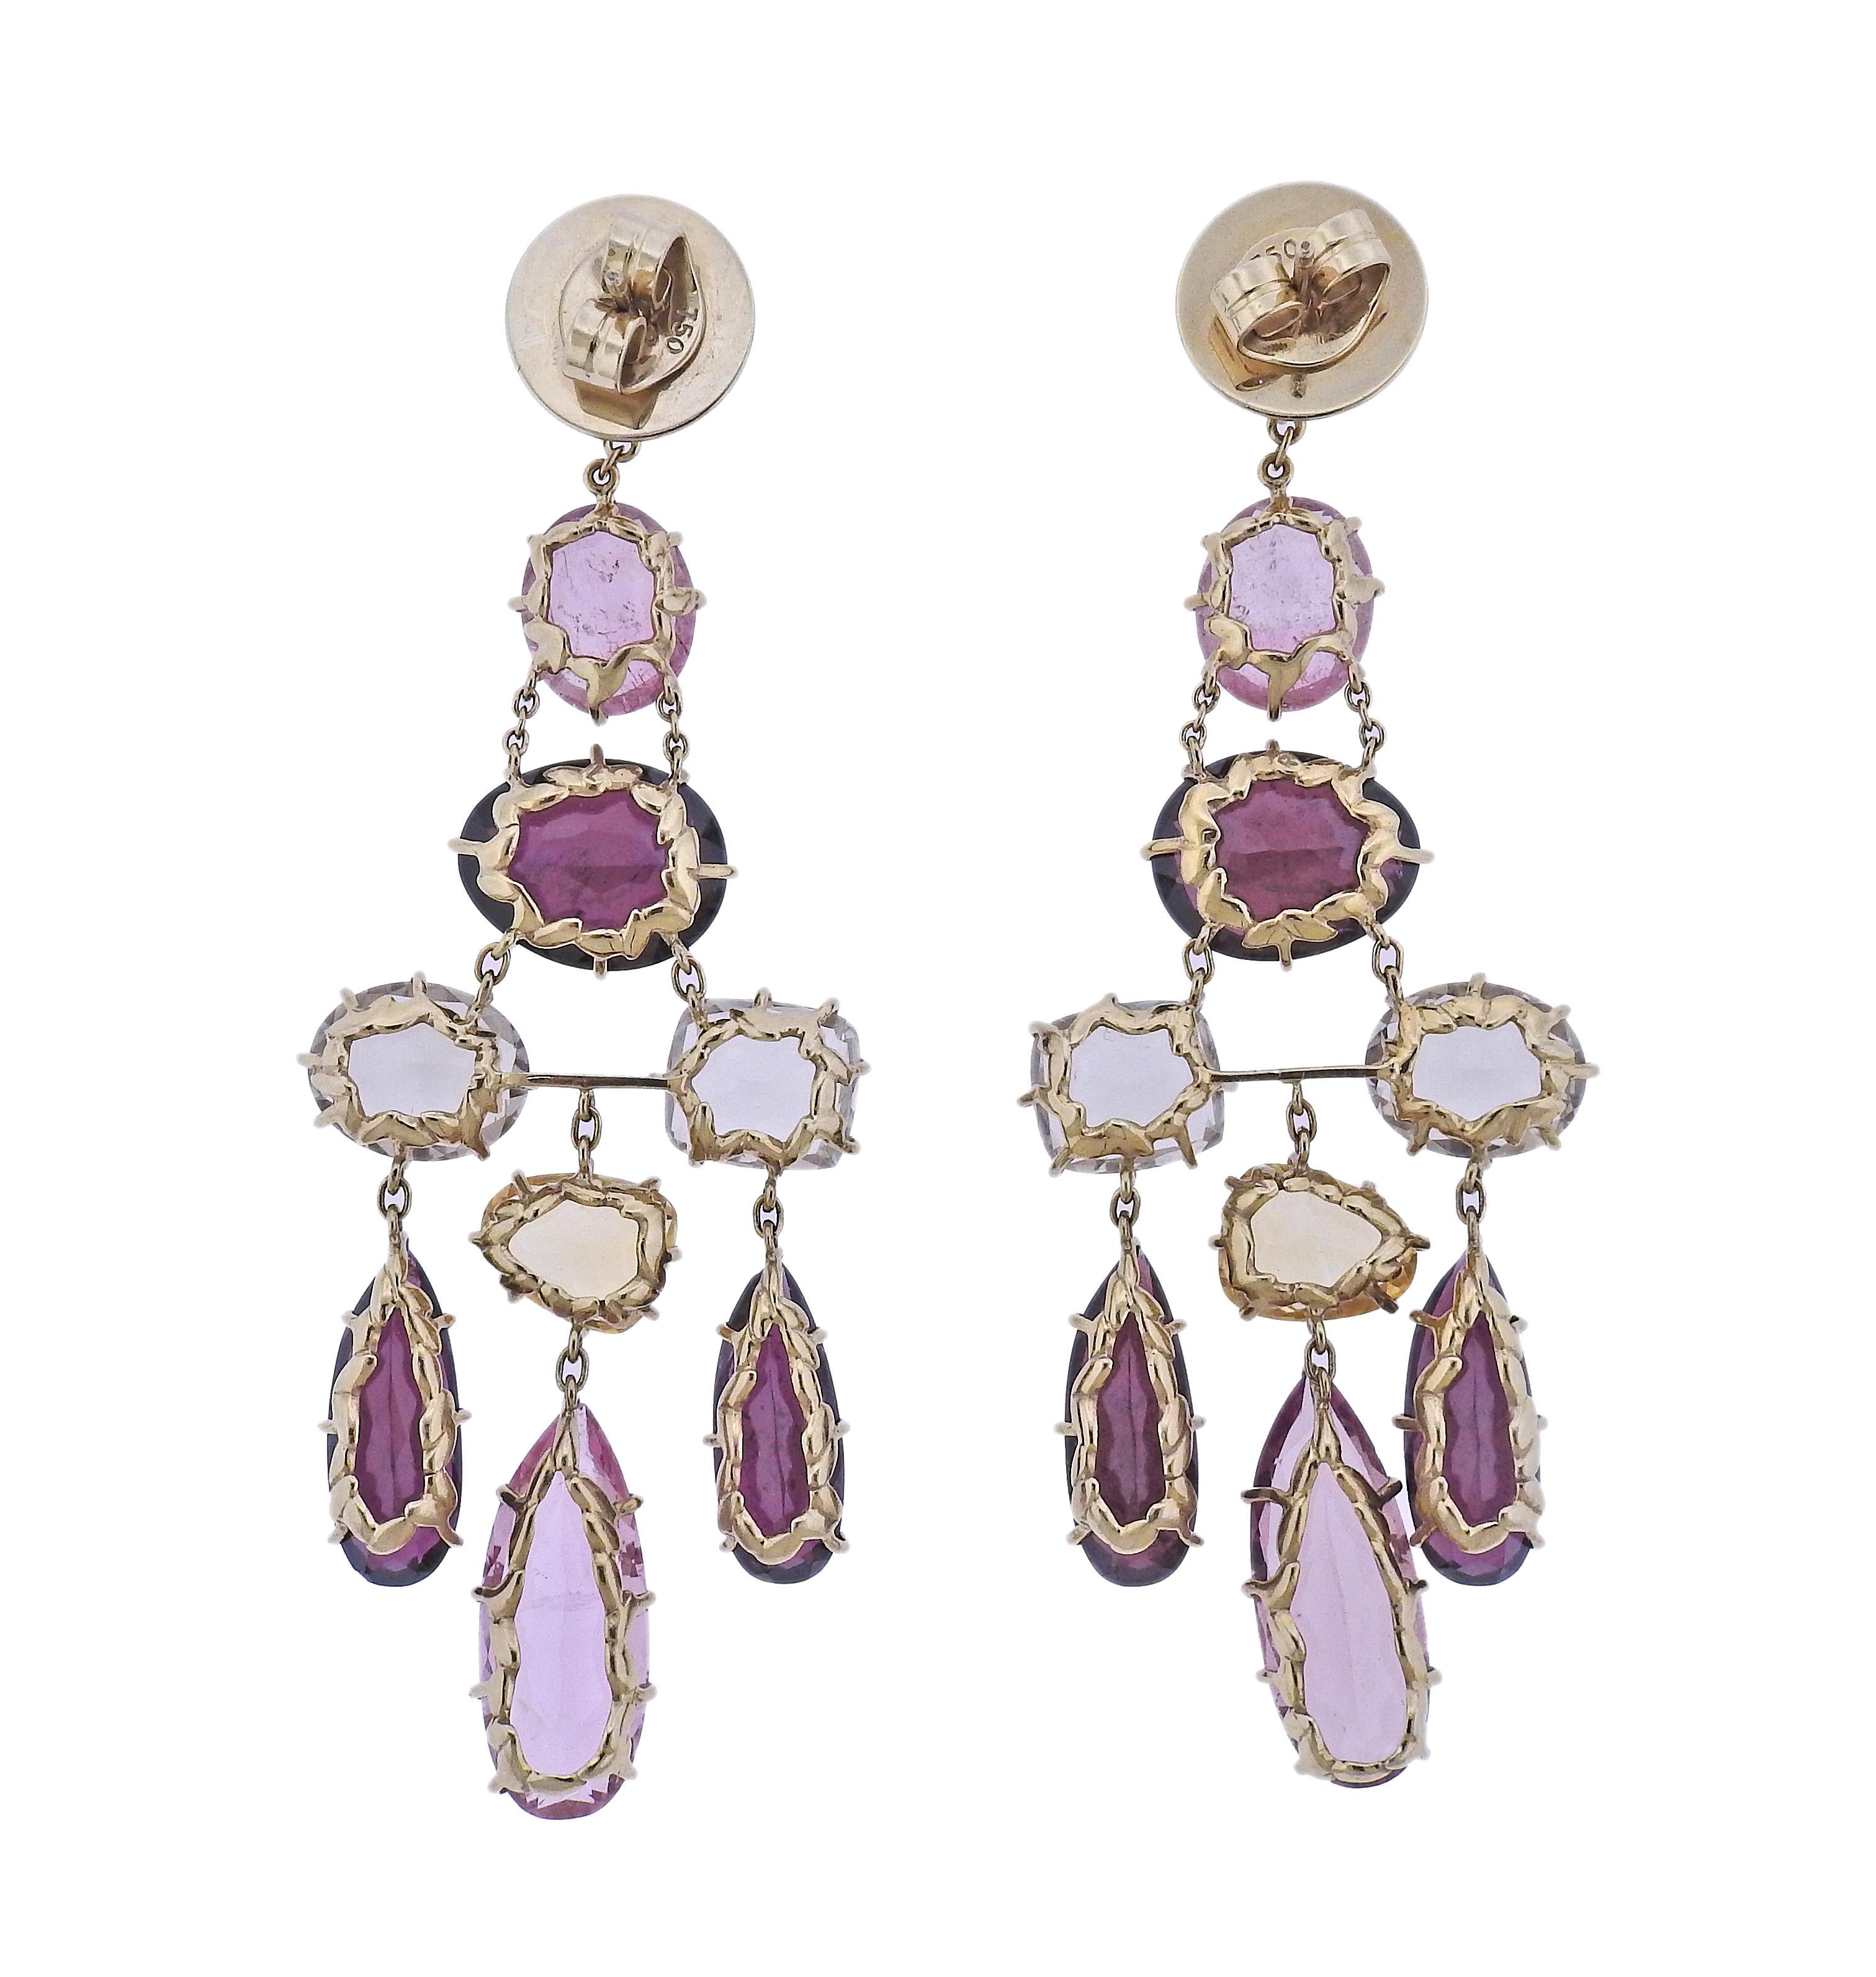 Pair of 18k gold chandelier Primavera earrings by H. Stern, set with pink tourmalines and crystal quartz. Earrings are 3